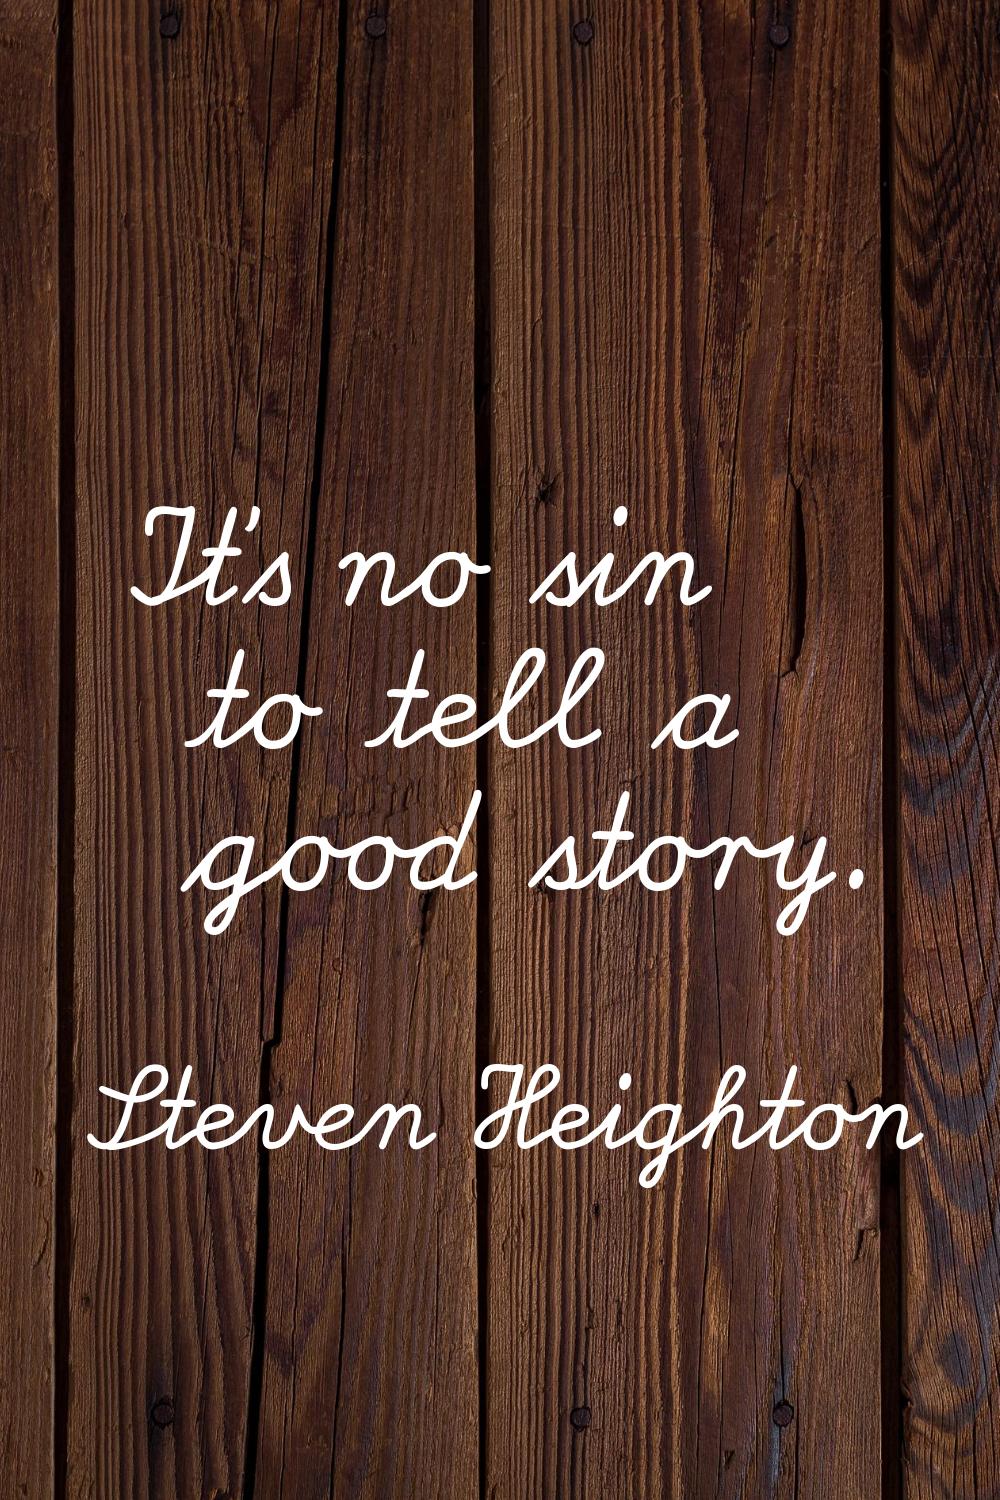 It's no sin to tell a good story.